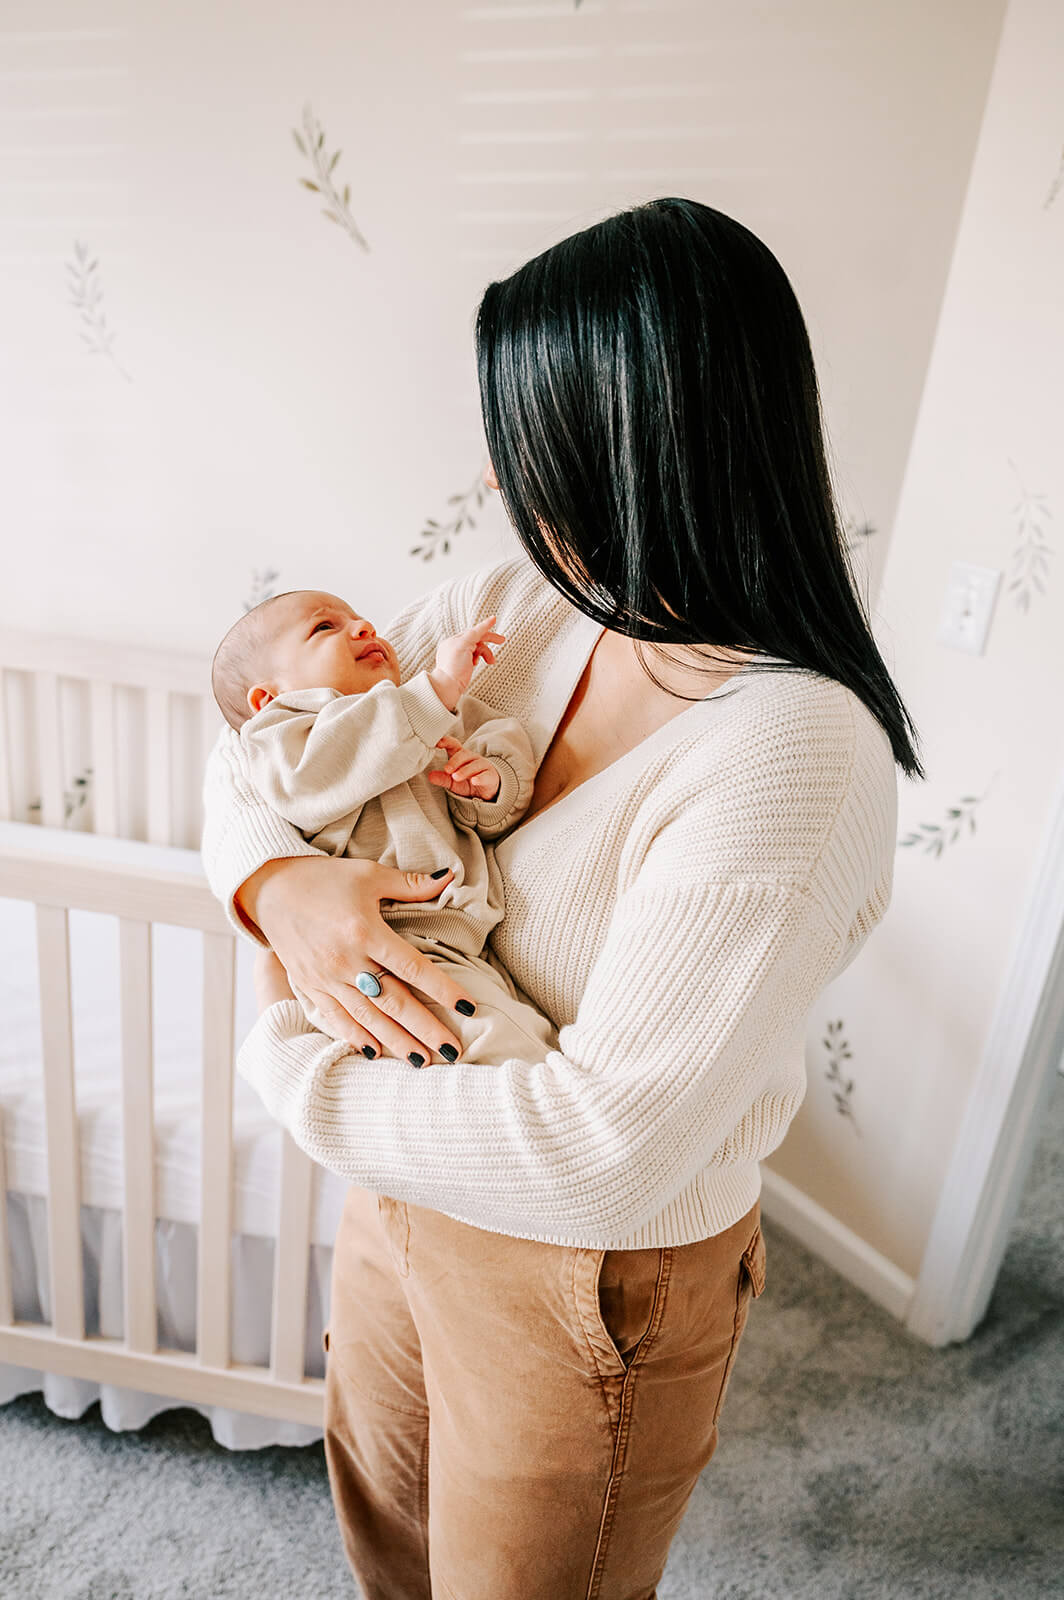 A mother in a white sweater cradles her newborn baby daughter while standing in her nursery after visiting pottery barn kids durham